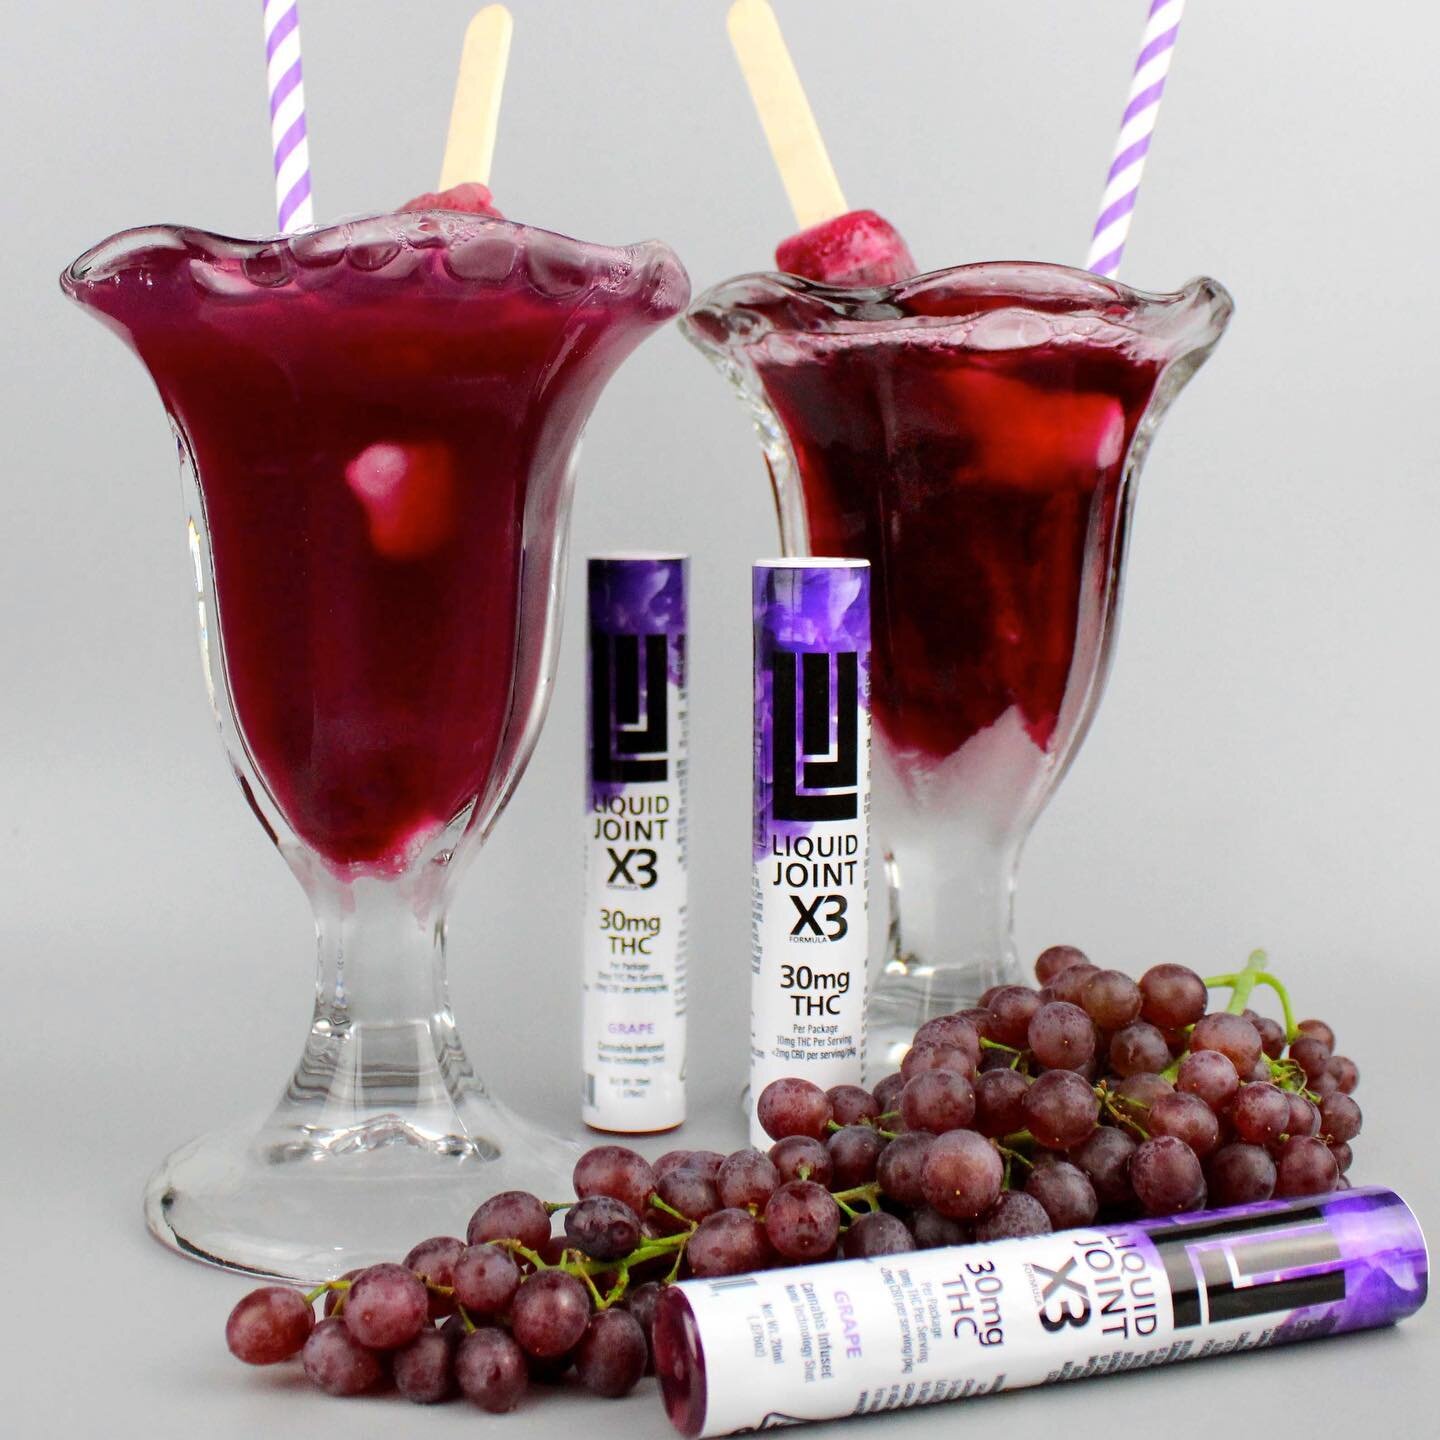 Hope you all have a GRAPE Tuesday 🍇 Get #litbyliquid with Liquid Joint #mixandmingle or #shakeandshoot 💥#poweredby3C #nanotechnology #fastacting